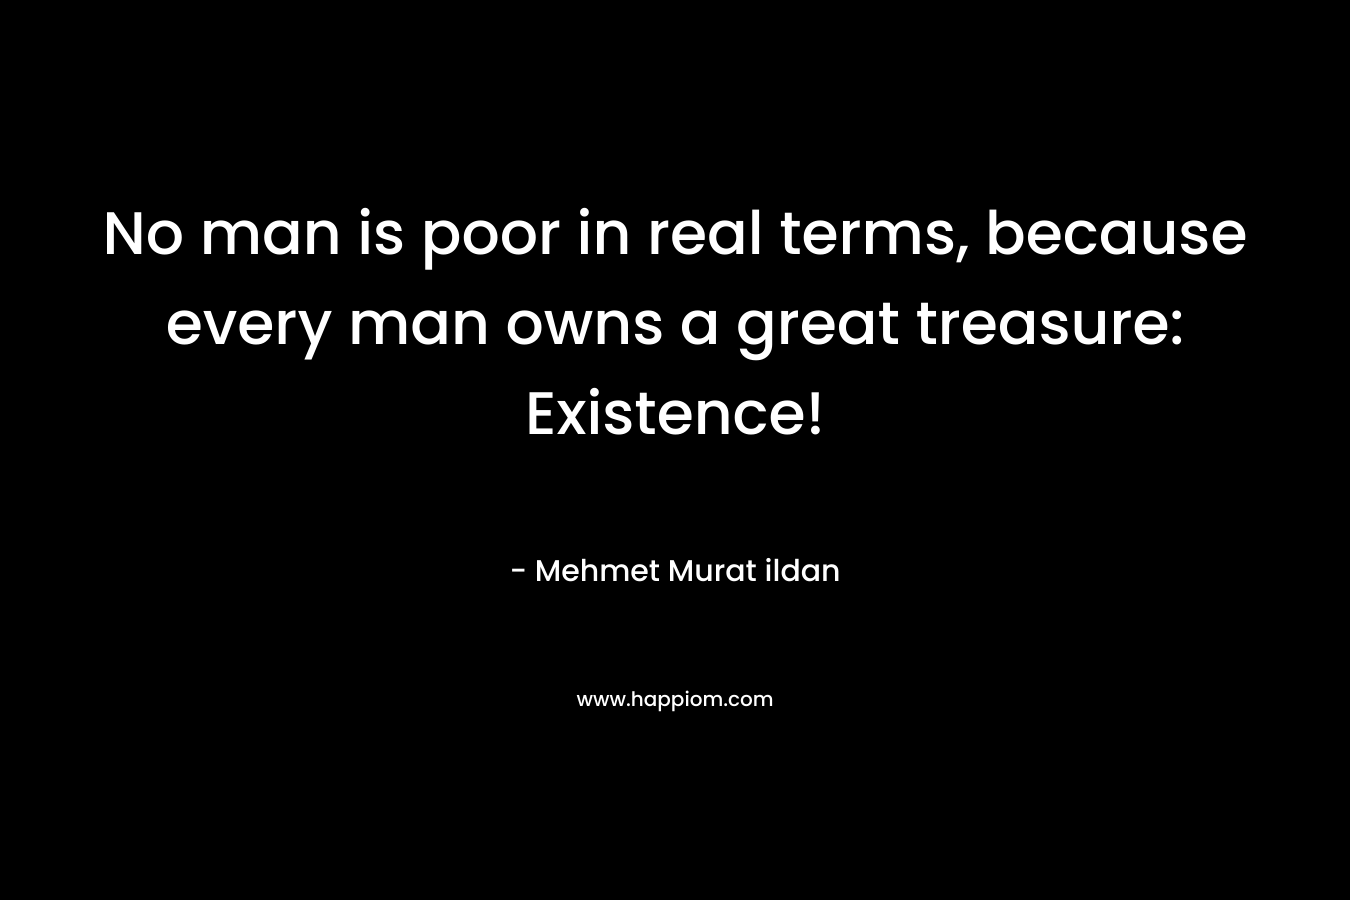 No man is poor in real terms, because every man owns a great treasure: Existence!